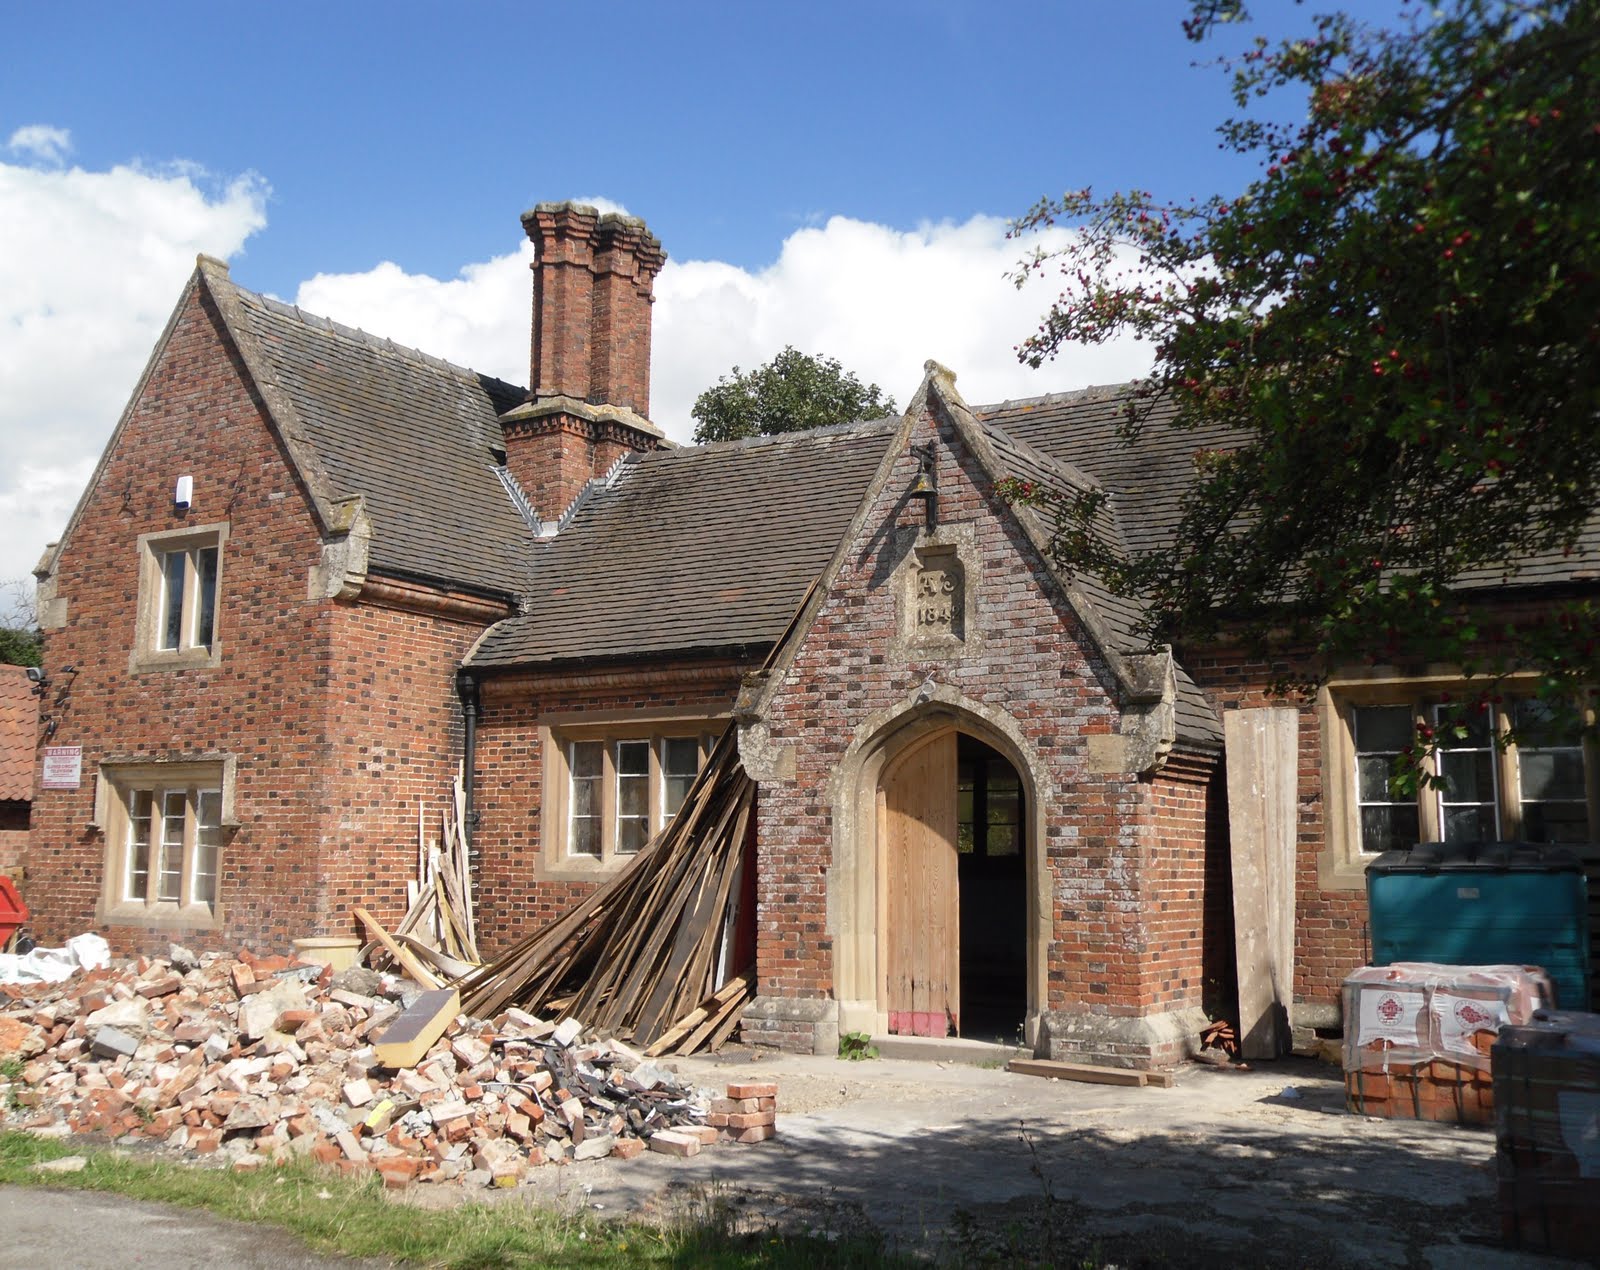 The old school being converted into a house 2013 - image from Dr Tony Shaw's blog.